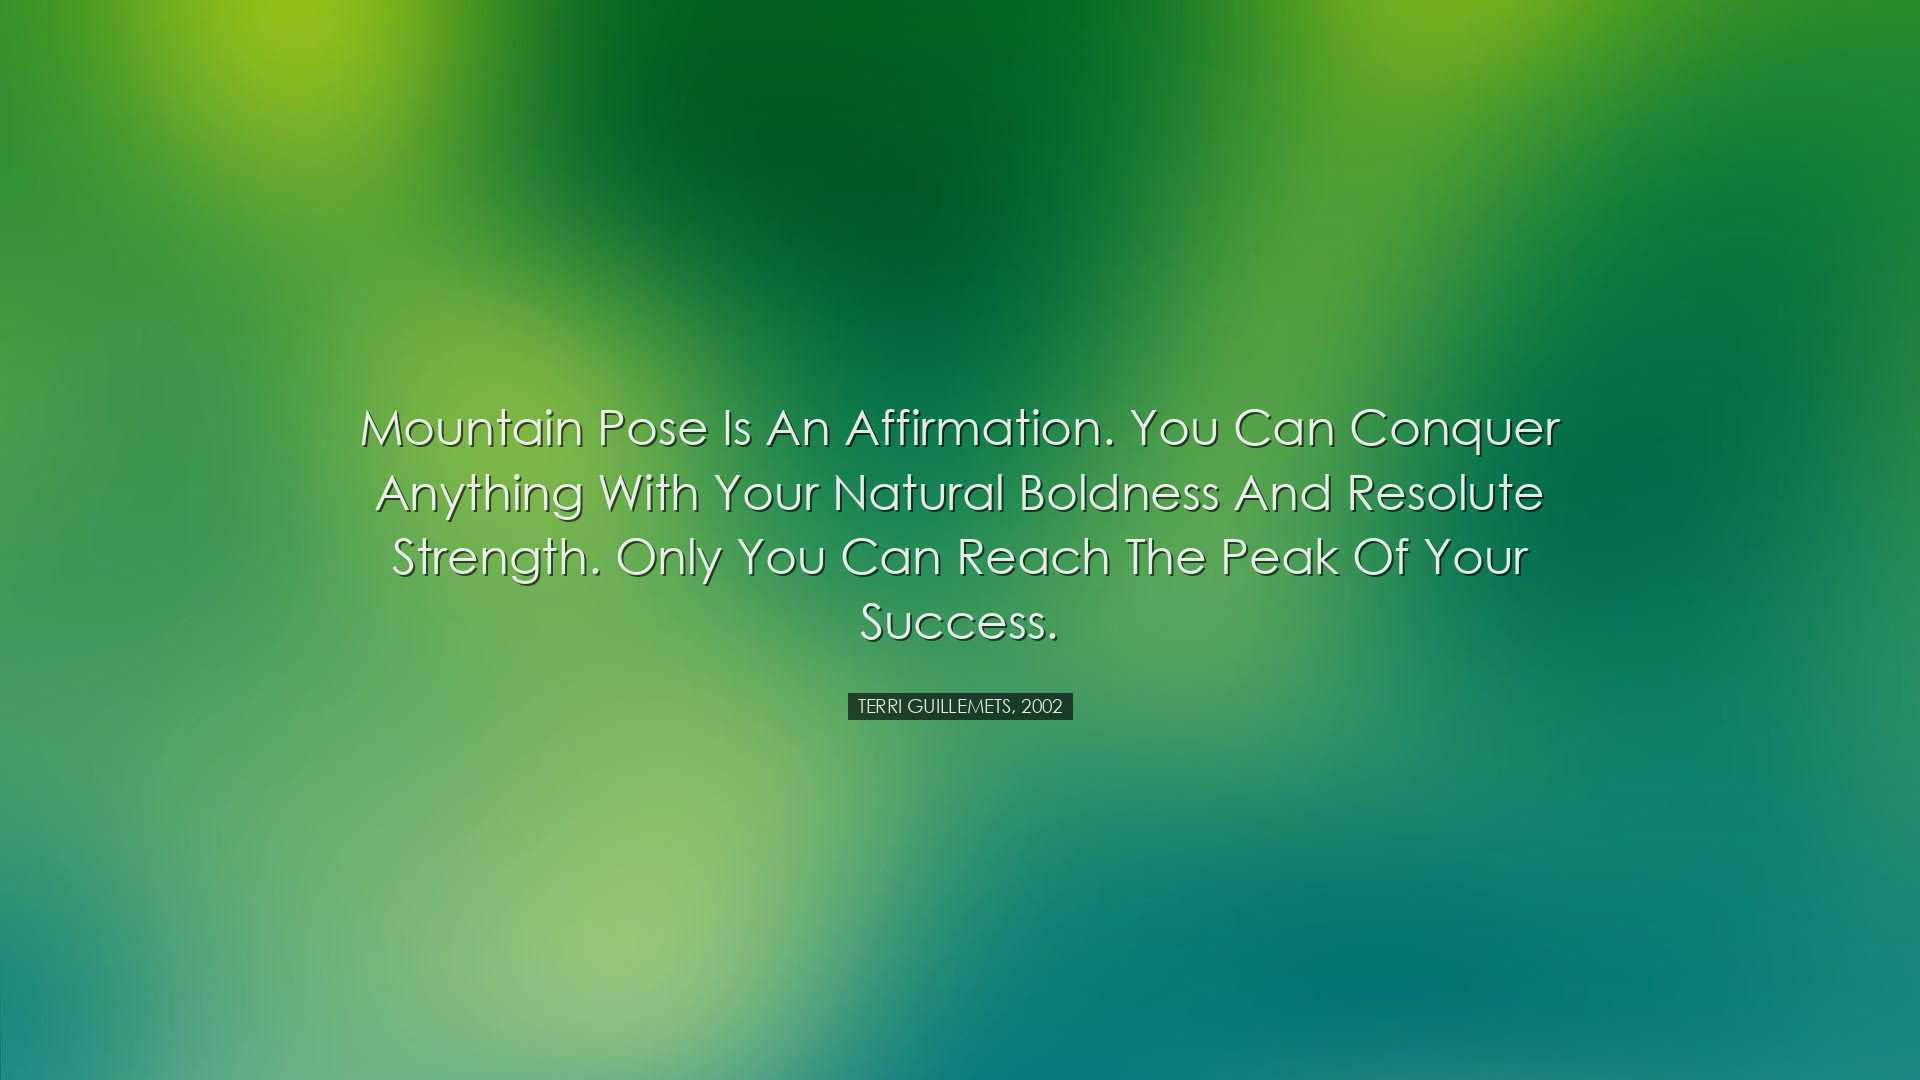 Mountain pose is an affirmation. You can conquer anything with you